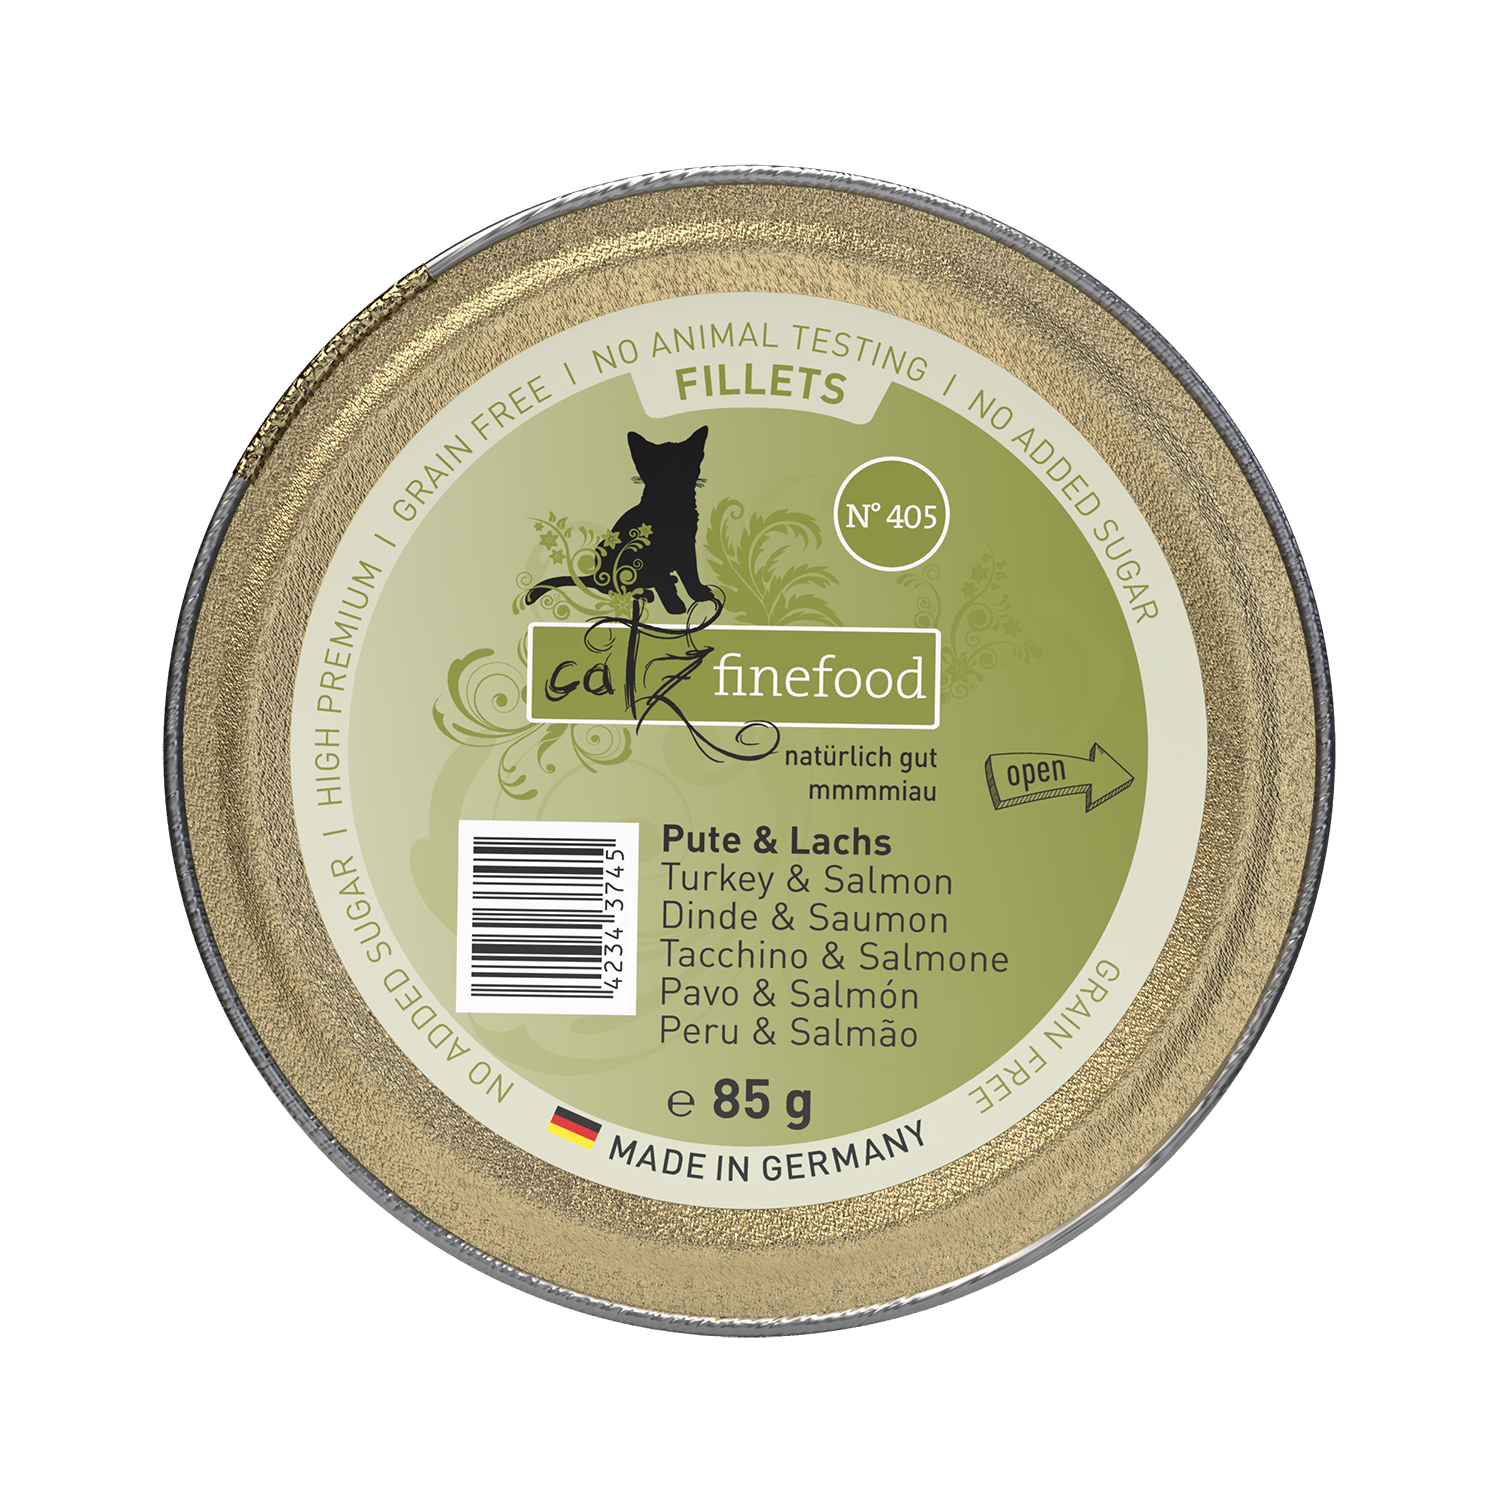 catz finefood Fillets N°405 - Pute, Huhn & Lachs in Jelly 85g